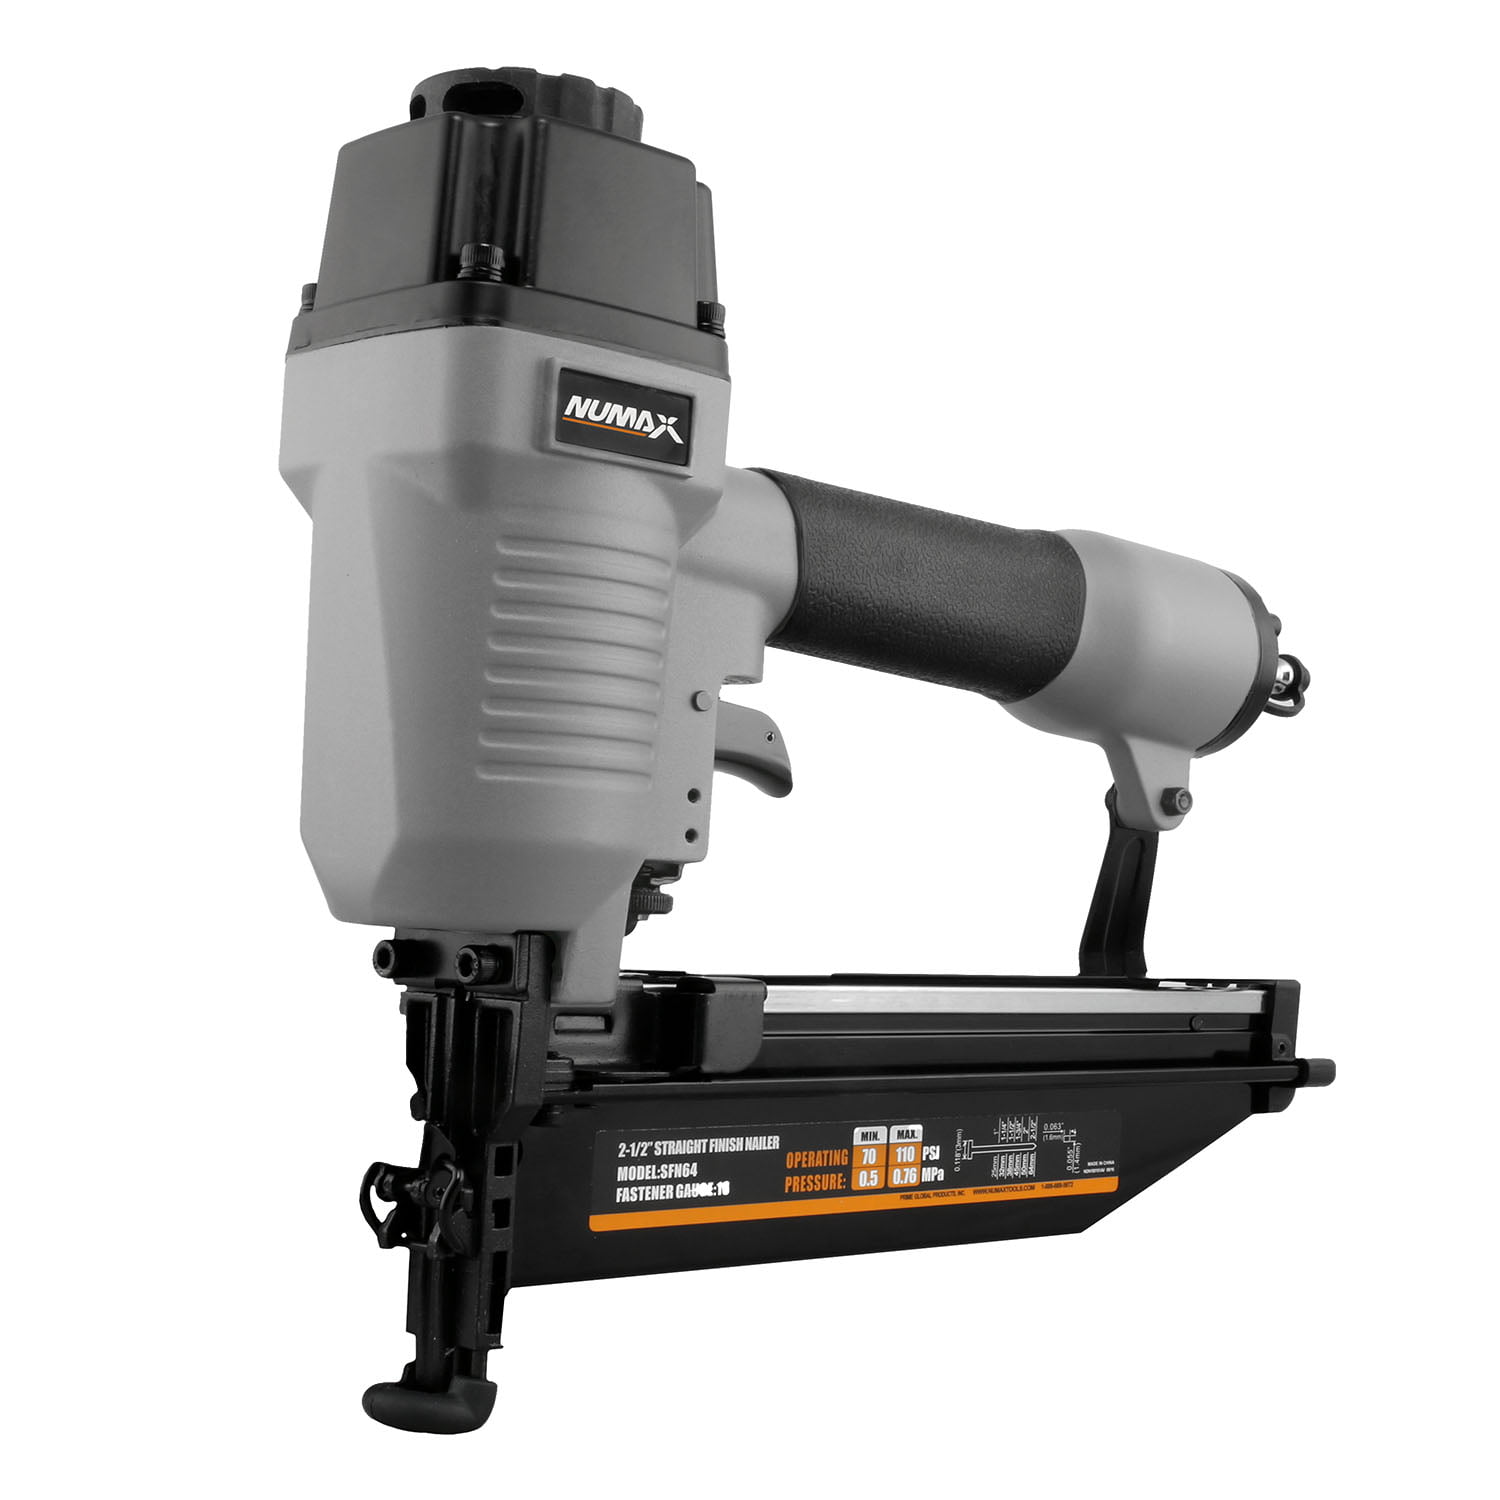 Numax SL31 Pneumatic 3-in-1 Air Nailer and Stapler for sale online 